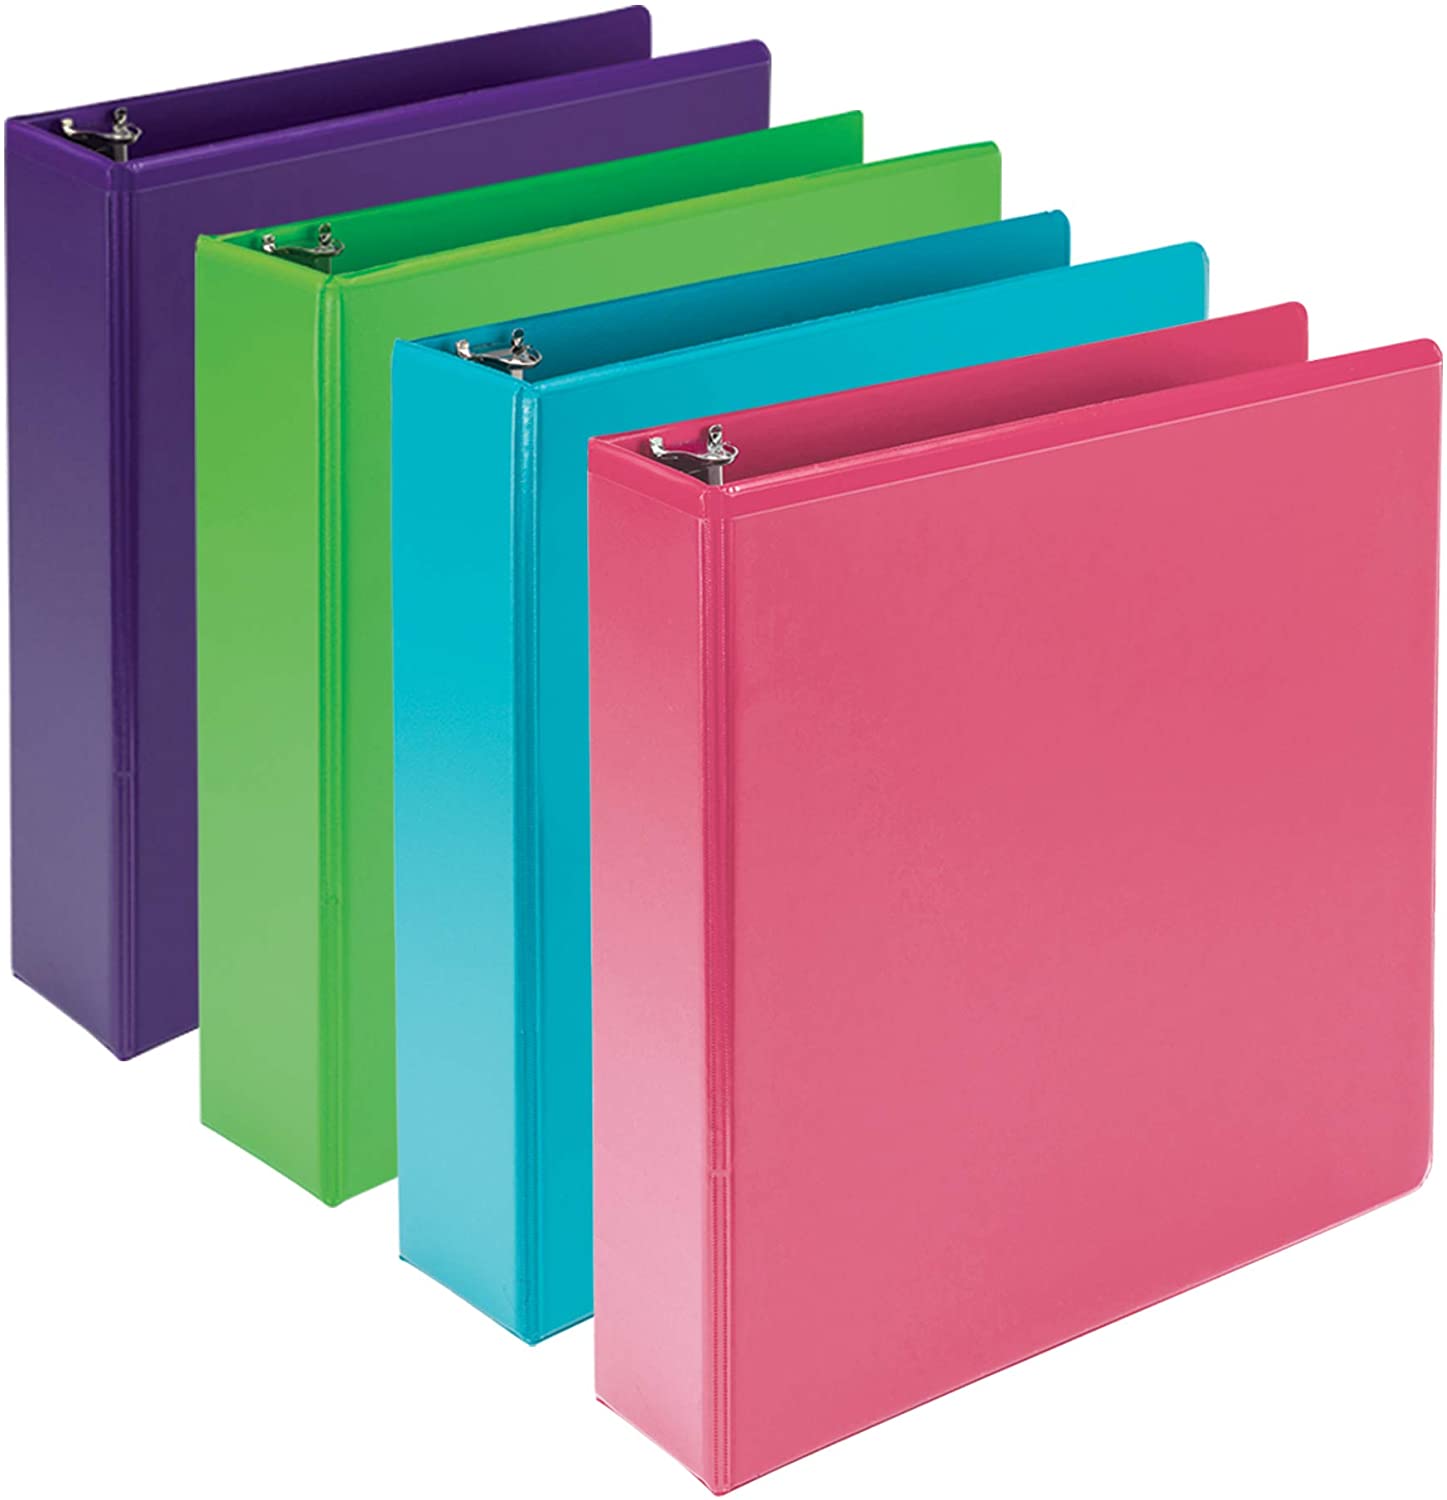 Samsill Earth’s Choice Biobased 3-Ring Binder, 4-Pack